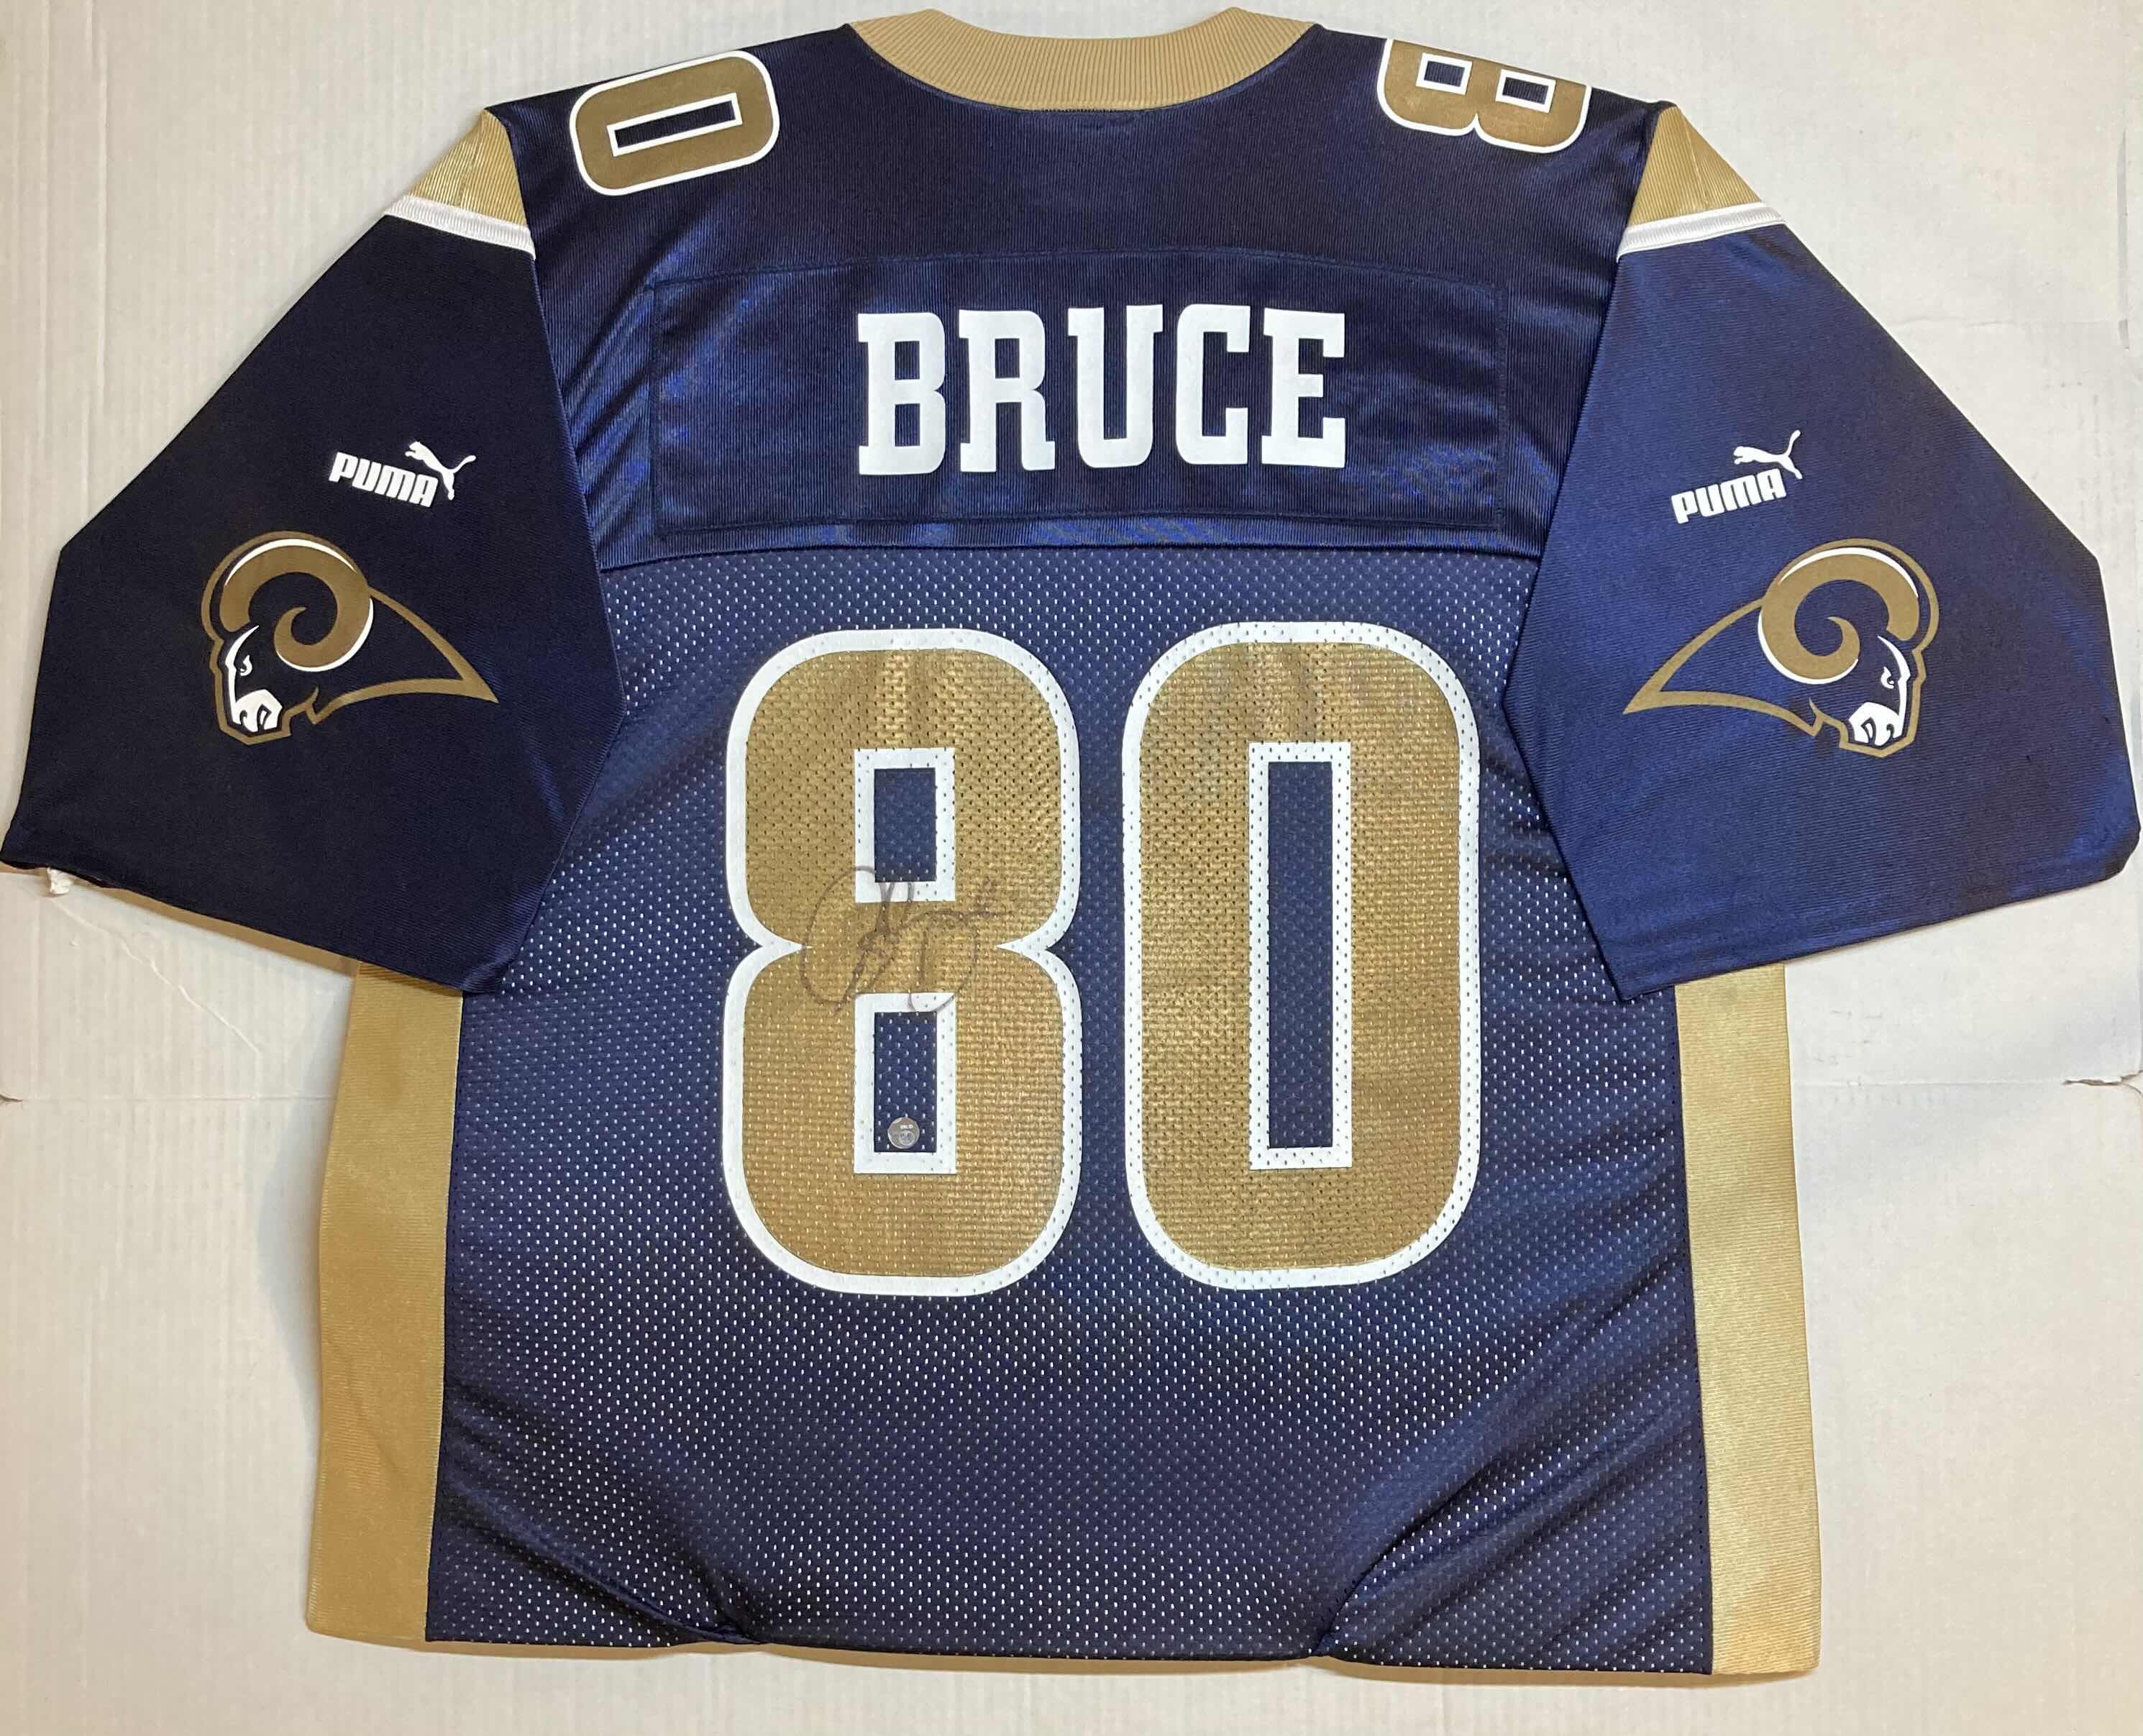 Photo 1 of ISAAC BRUCE ST. LOUIS RAMS #80 DISPLAY JERSEY AUTOGRAPHED BY ISAAC BRUCE NO COA 35.5” X 27.5”